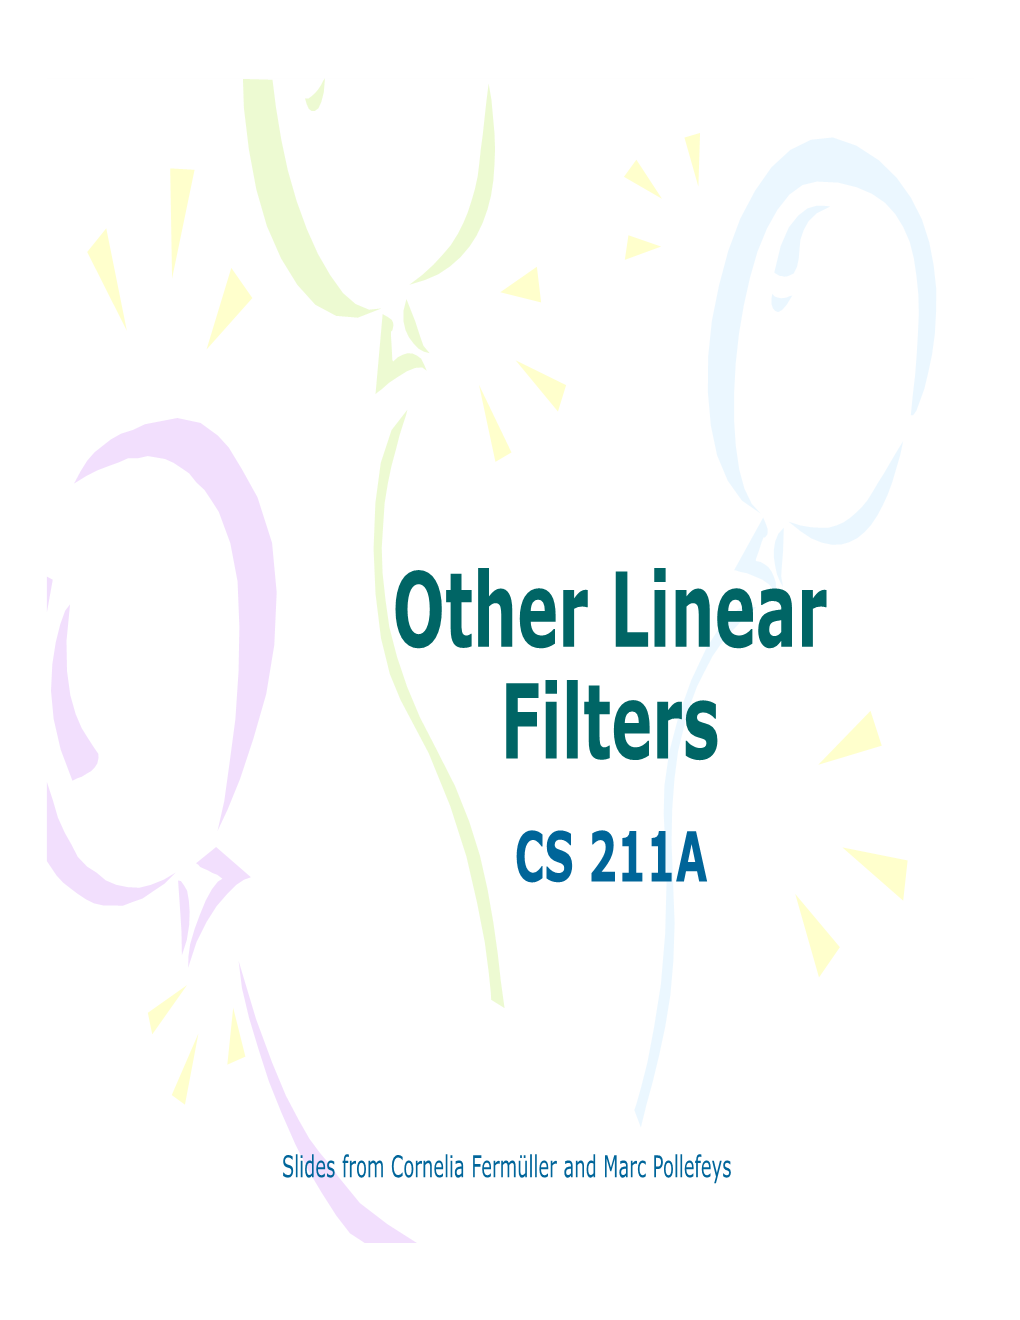 Other Linear Filters CS 211A